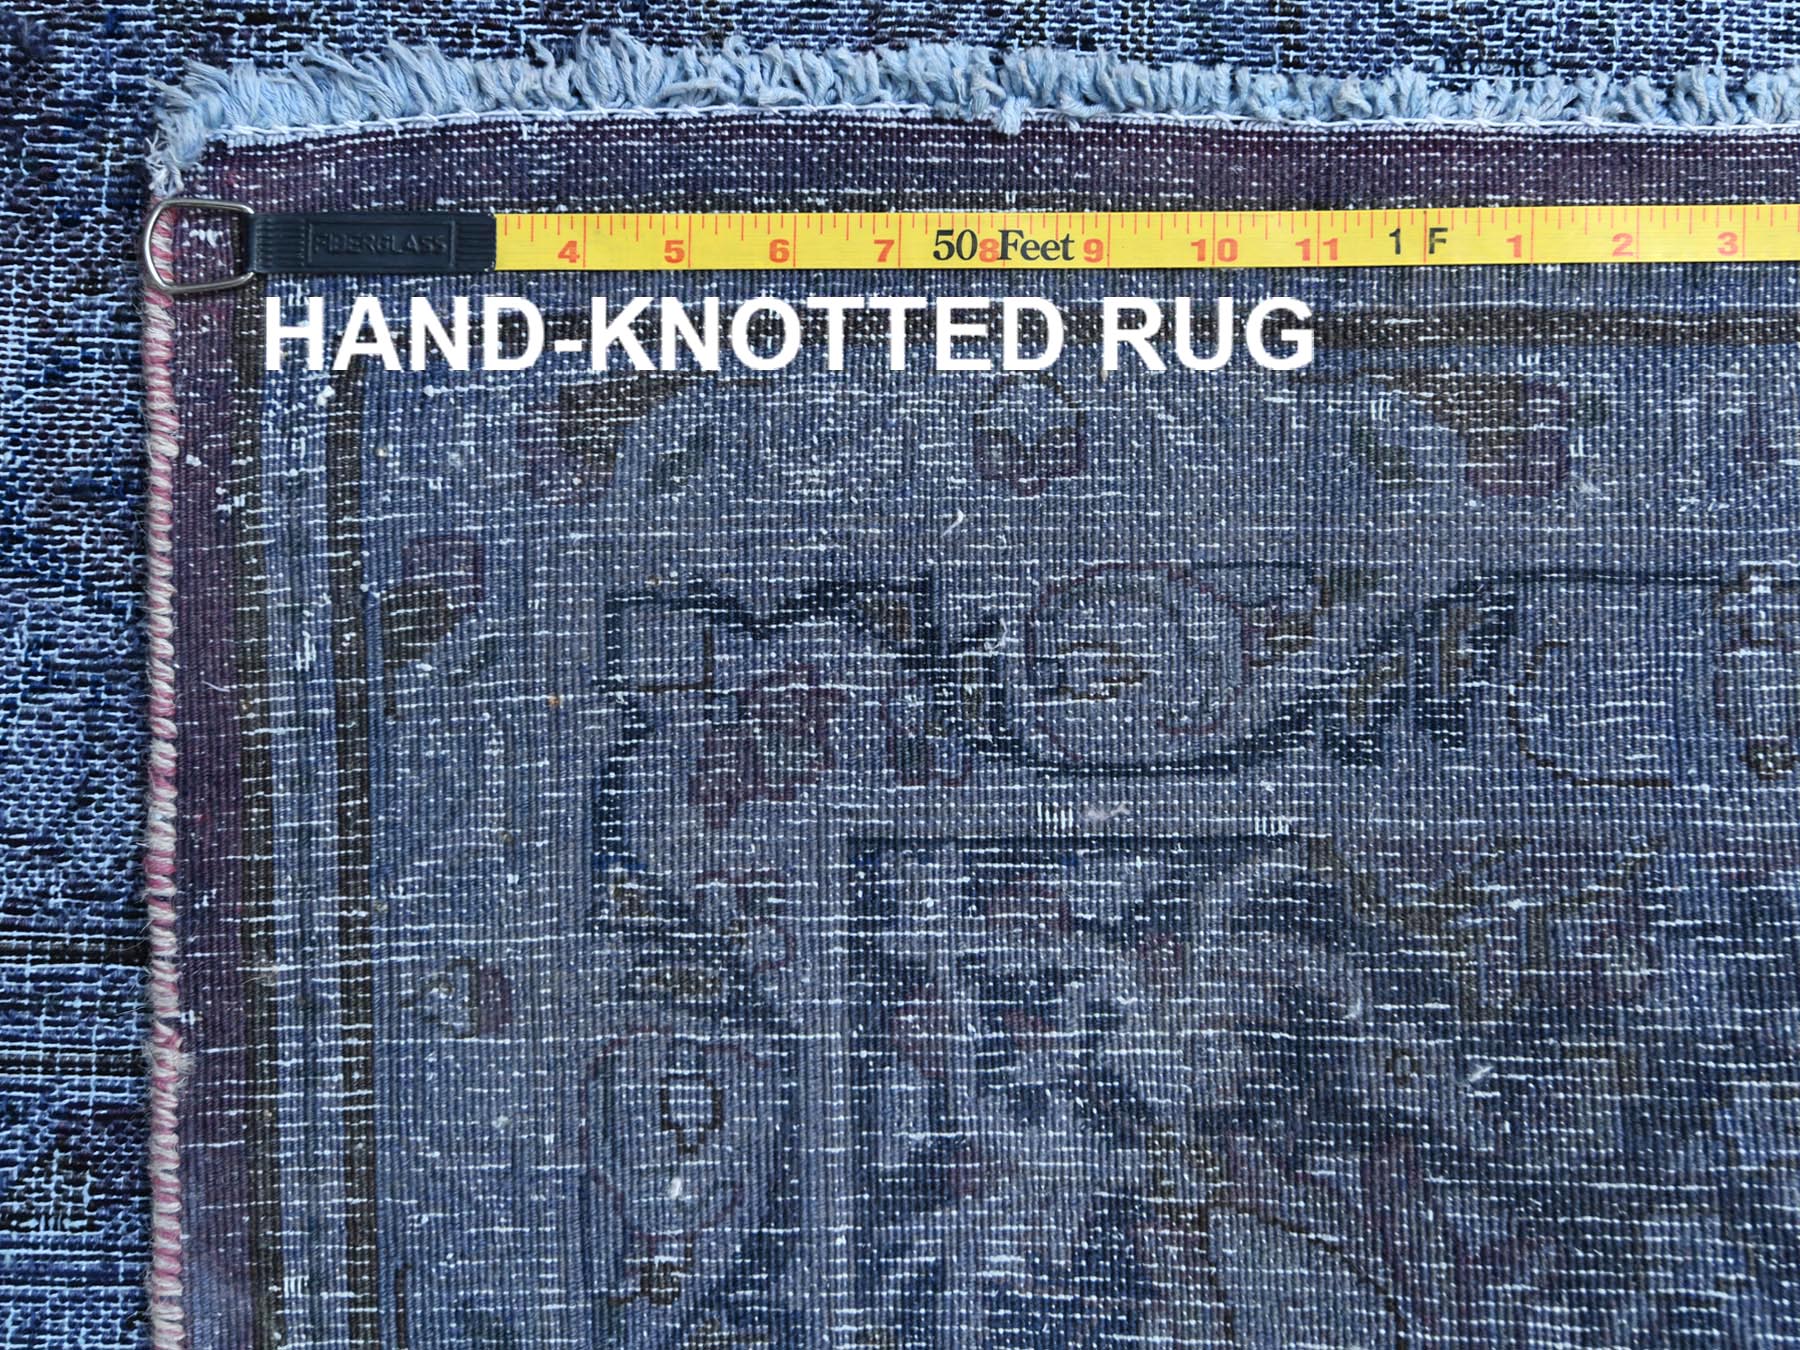 Overdyed & Vintage Rugs LUV552069